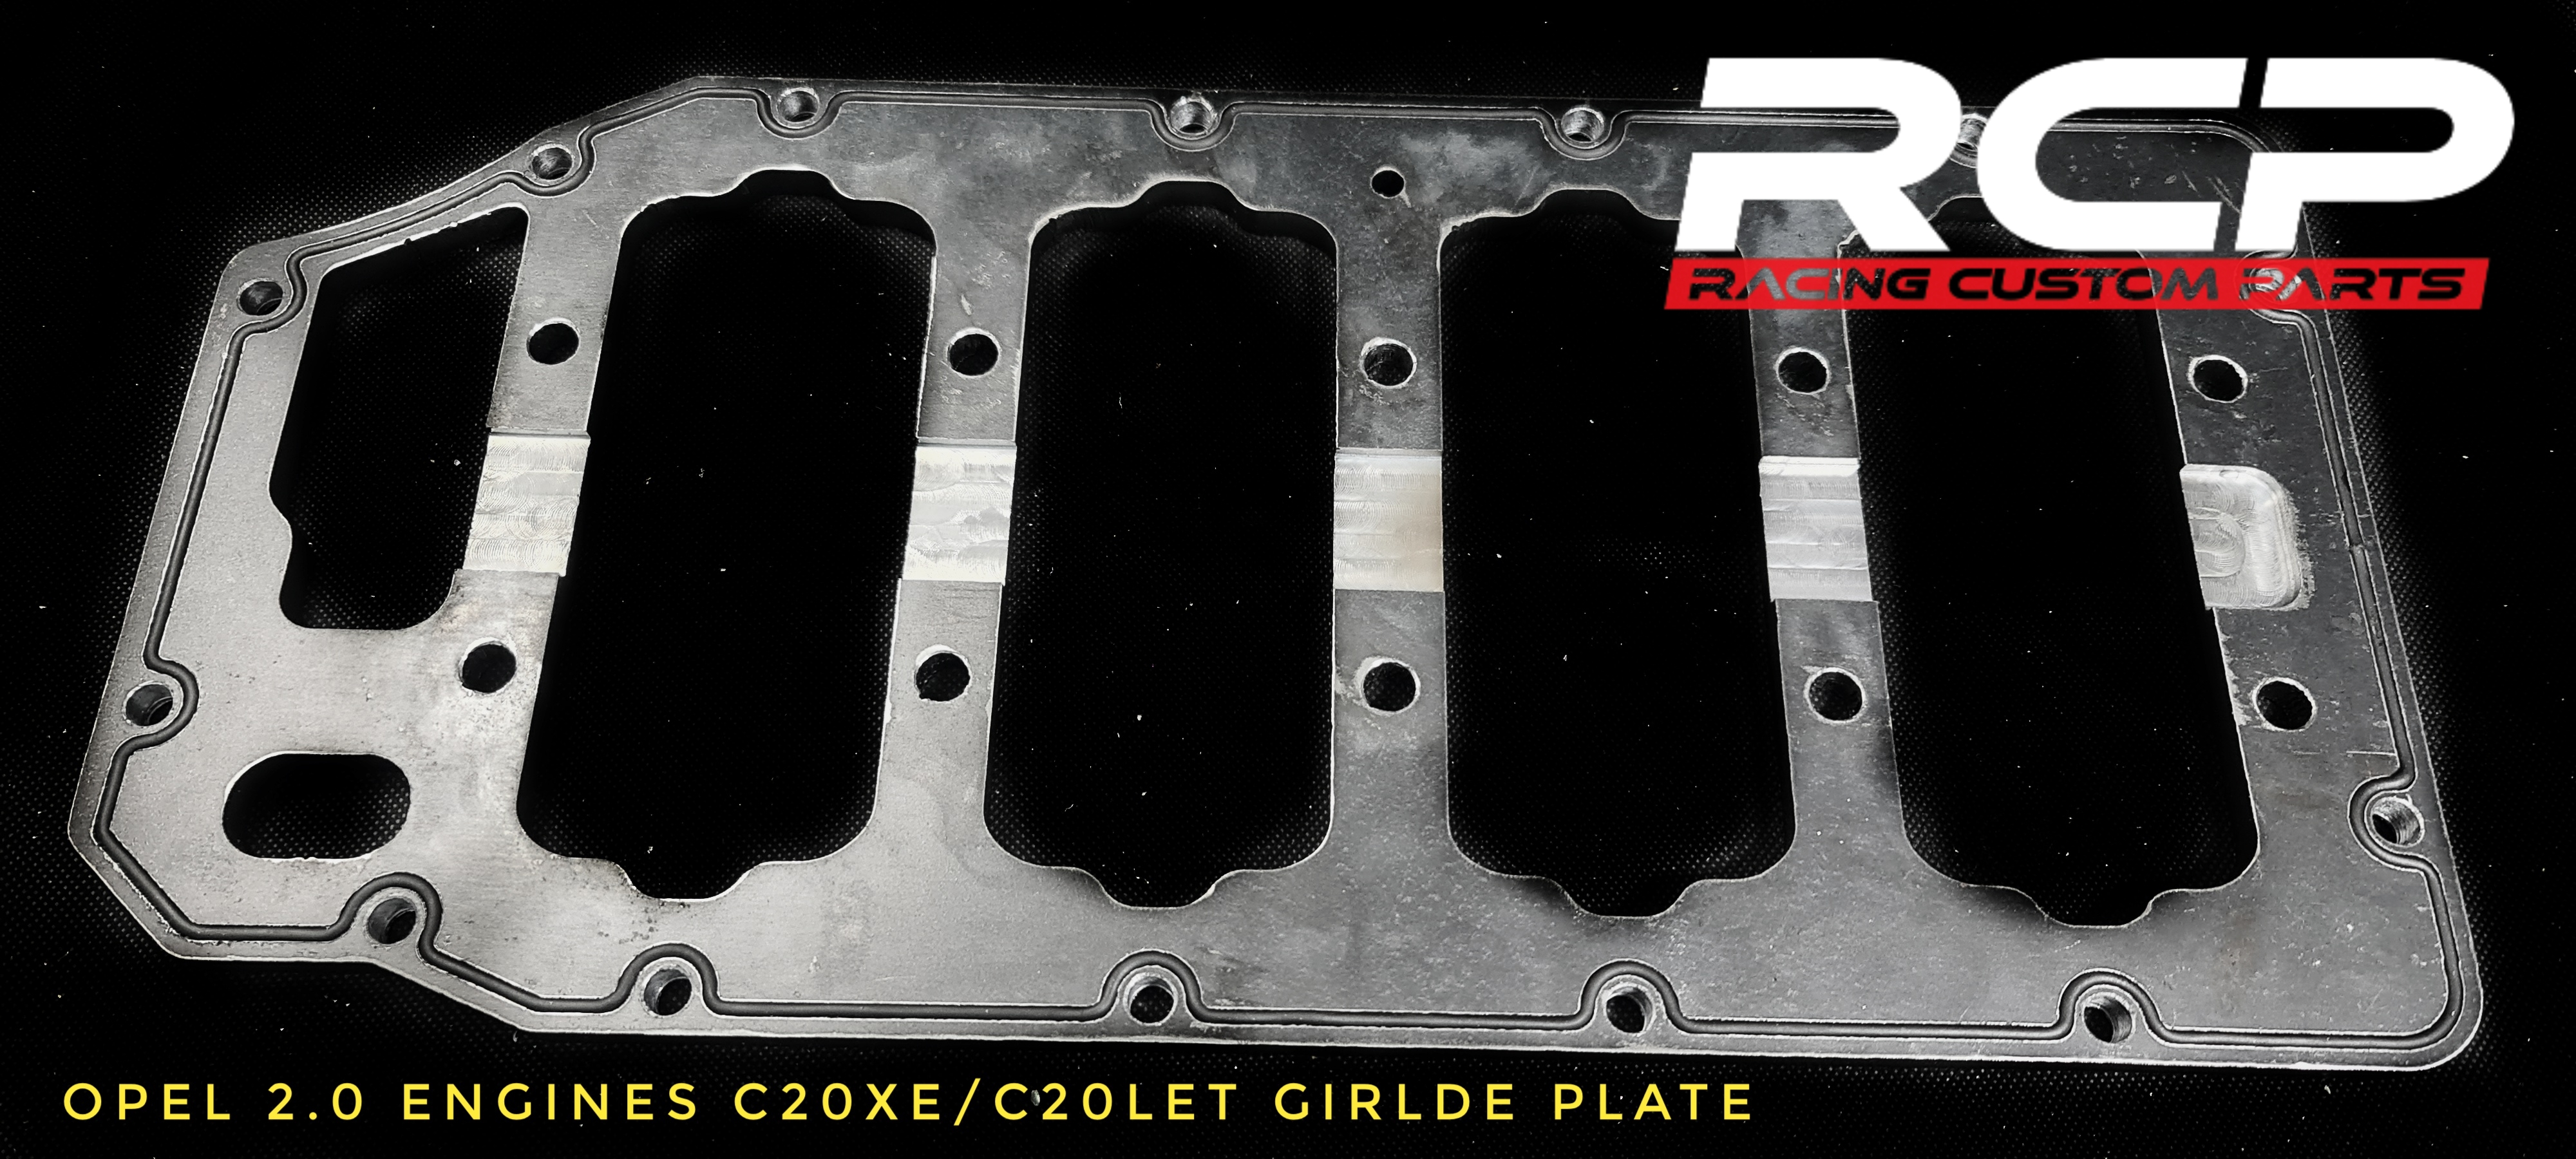 c20xe c20let z20let girdle plate oilpan opel vauxhall holden calibra vectra astra kadet turbo racing custom parts rcp griddle plate block girdle